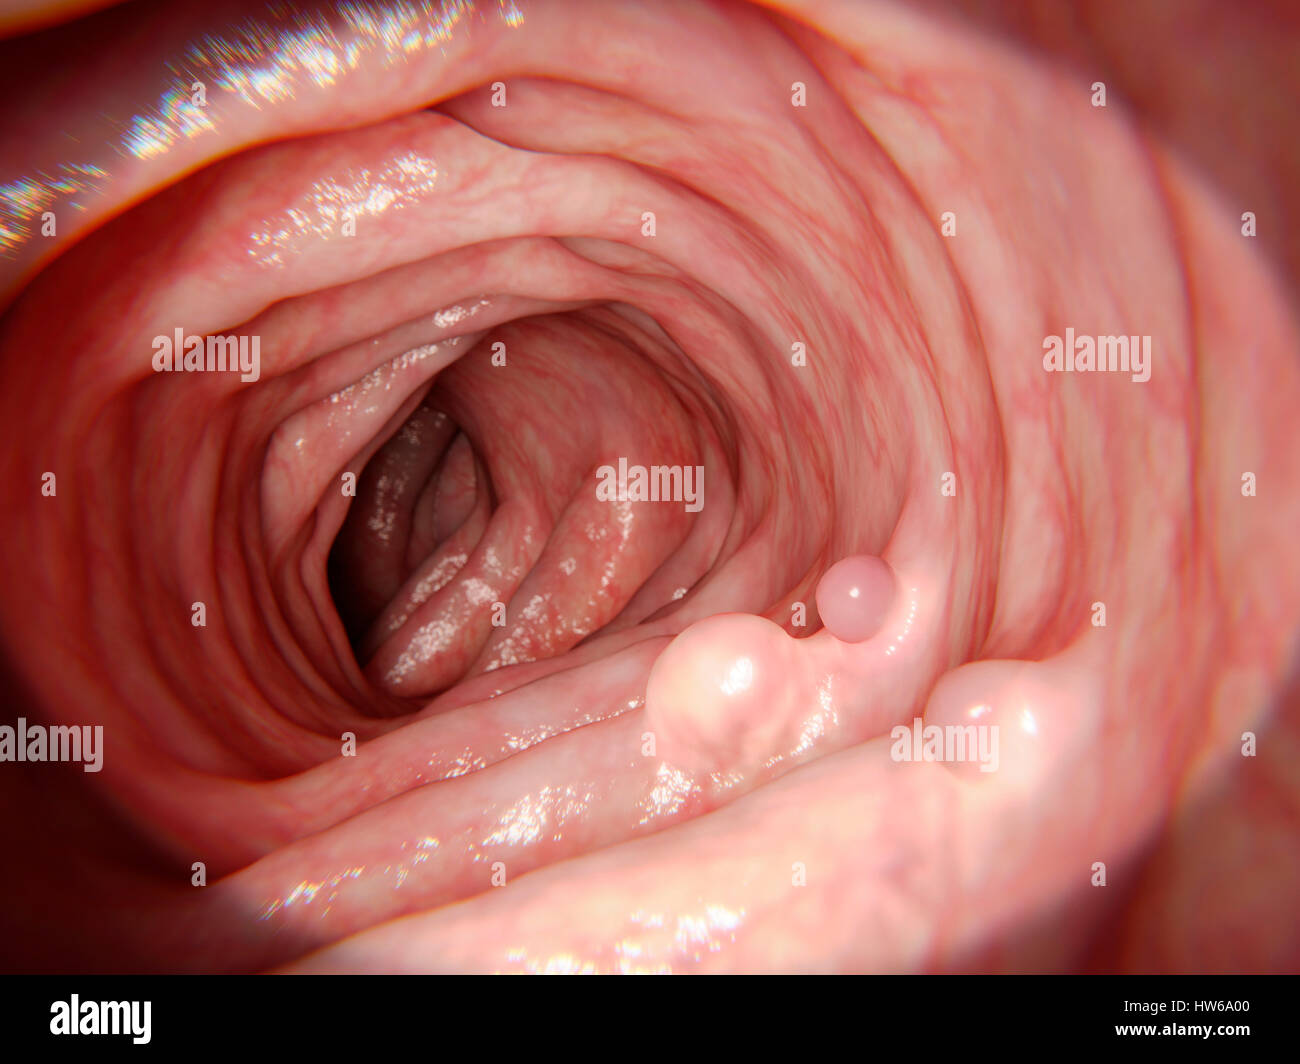 Computer illustration of polyps in the intestine. Polyps are small benign (non-cancerous) growths that arise from the mucus lining of the intestine. Polyps should be surgically removed as they may become malignant (cancerous). Stock Photo